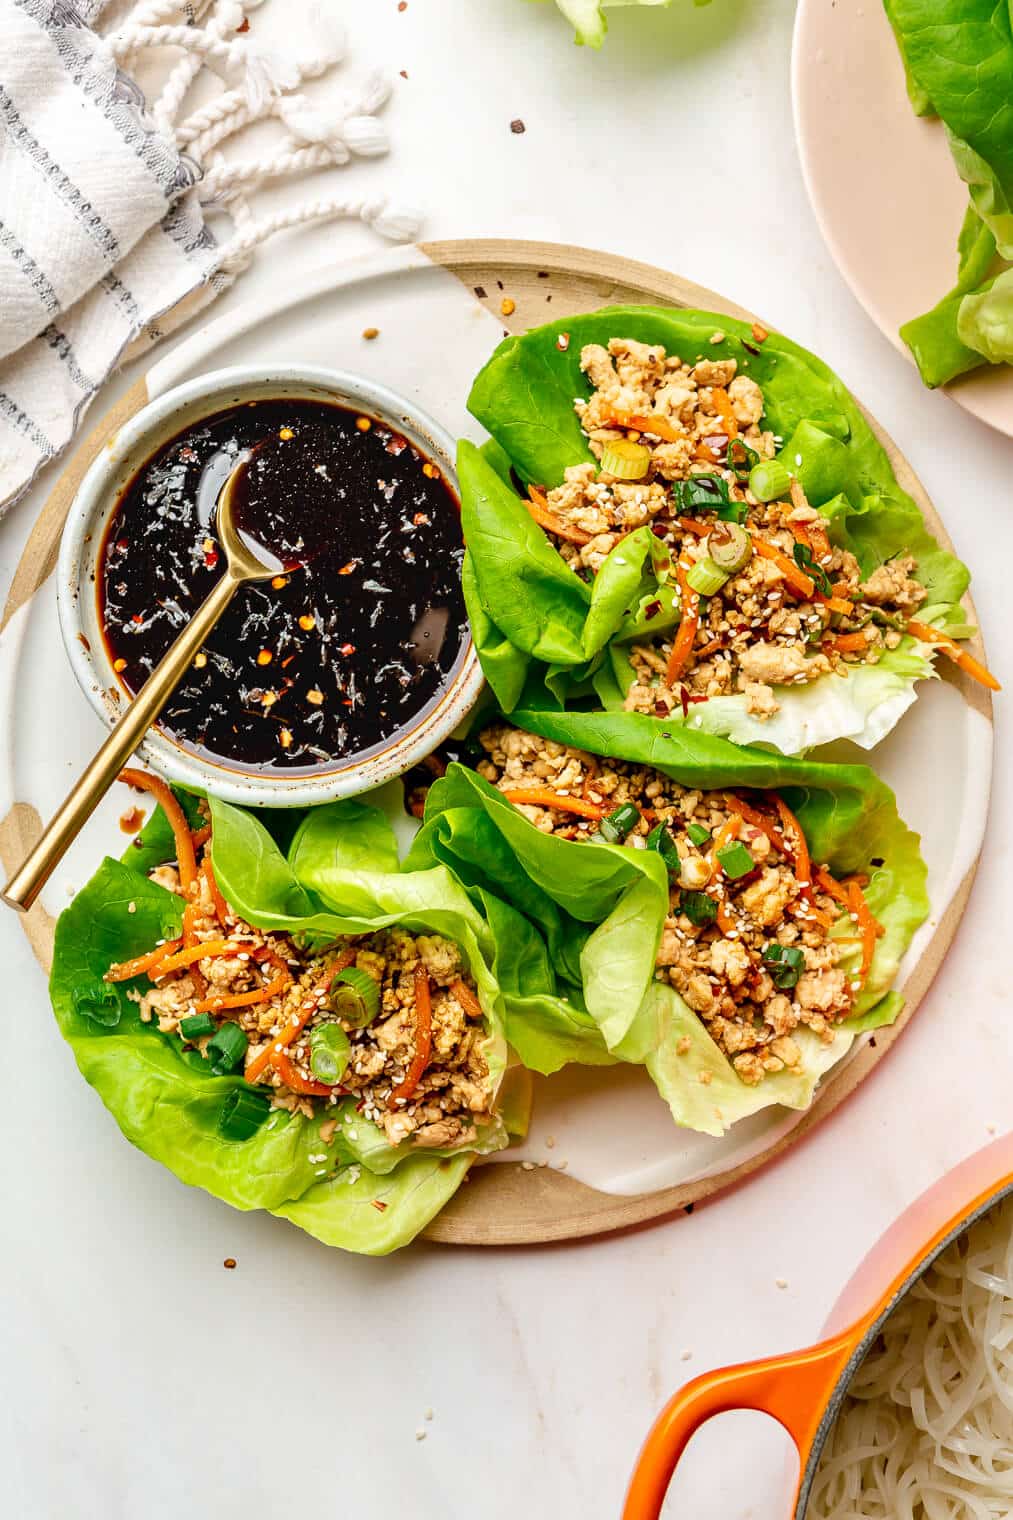 Three lettuce wraps on a plate with a bowl of dark, thick, sticky sauce.